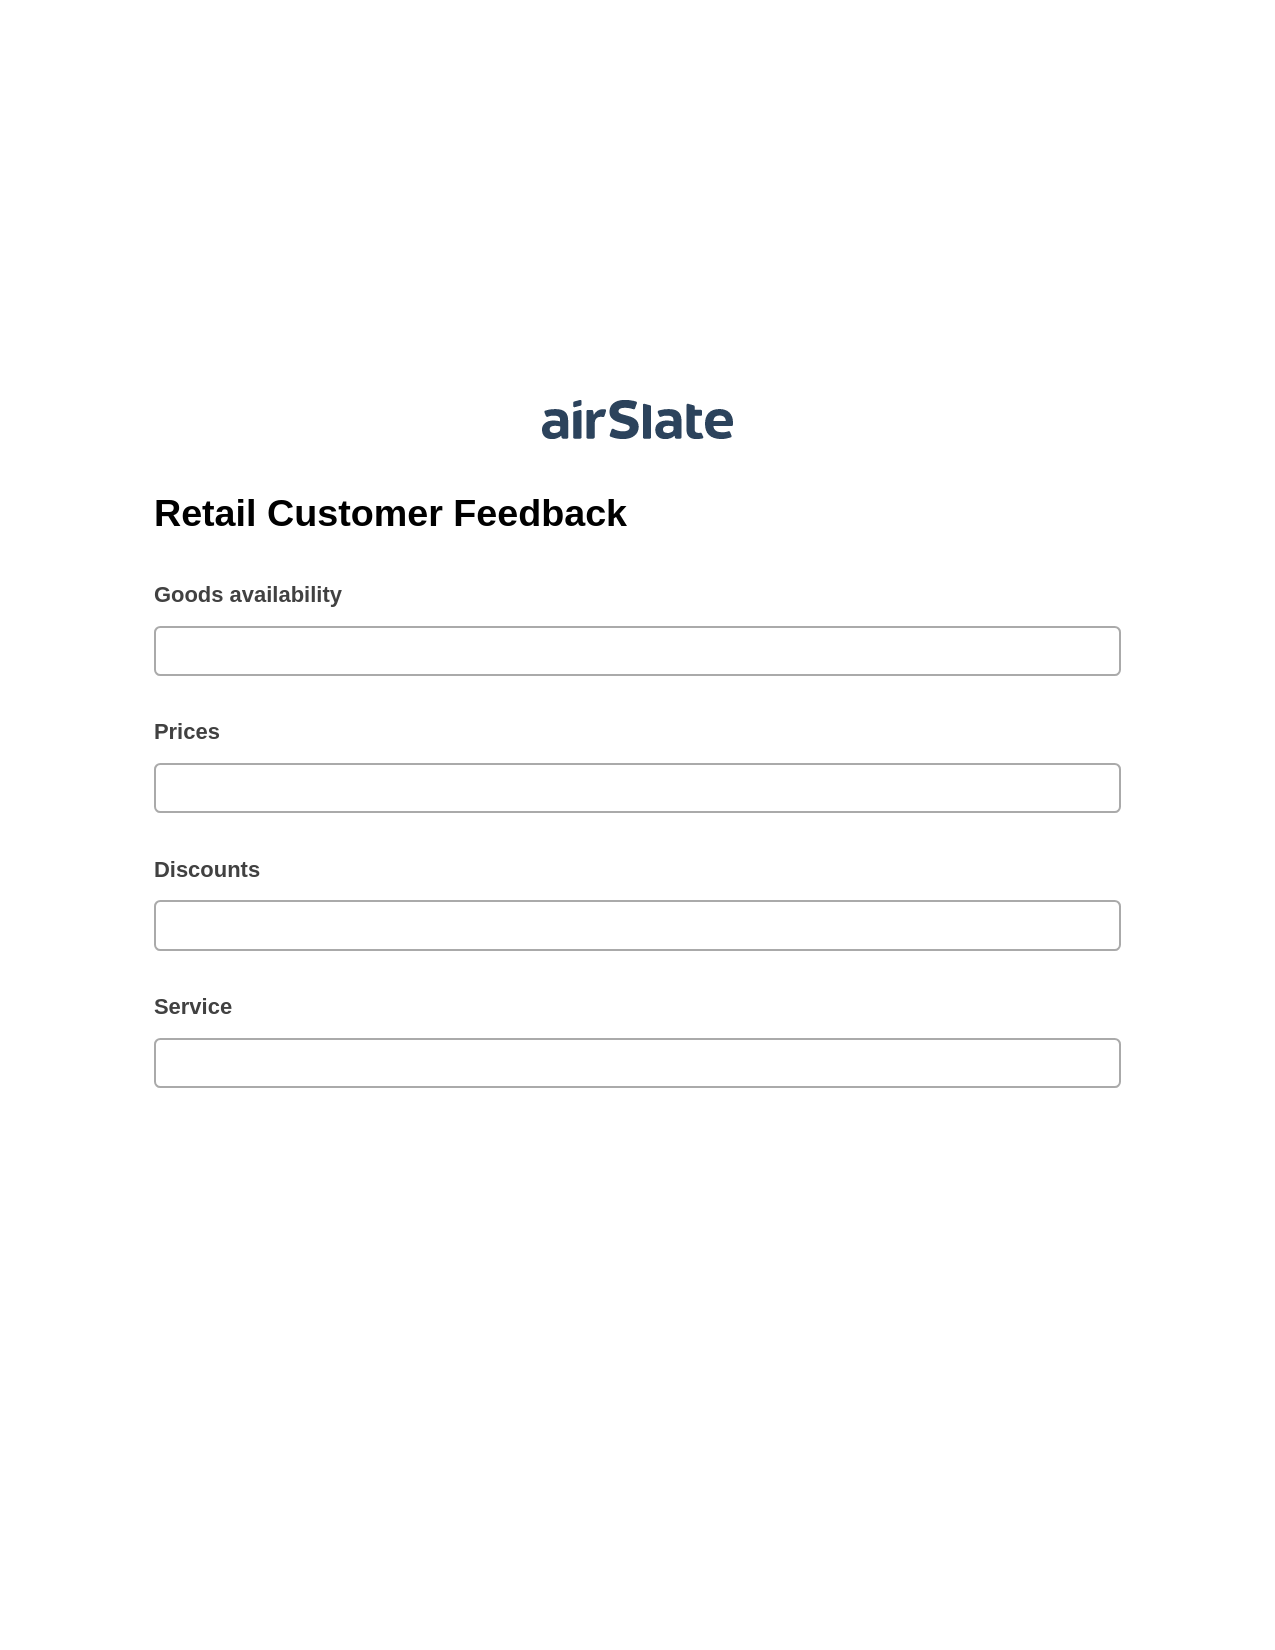 Retail Customer Feedback Pre-fill Slate from MS Dynamics 365 Records Bot, Email Notification Bot, Google Drive Bot